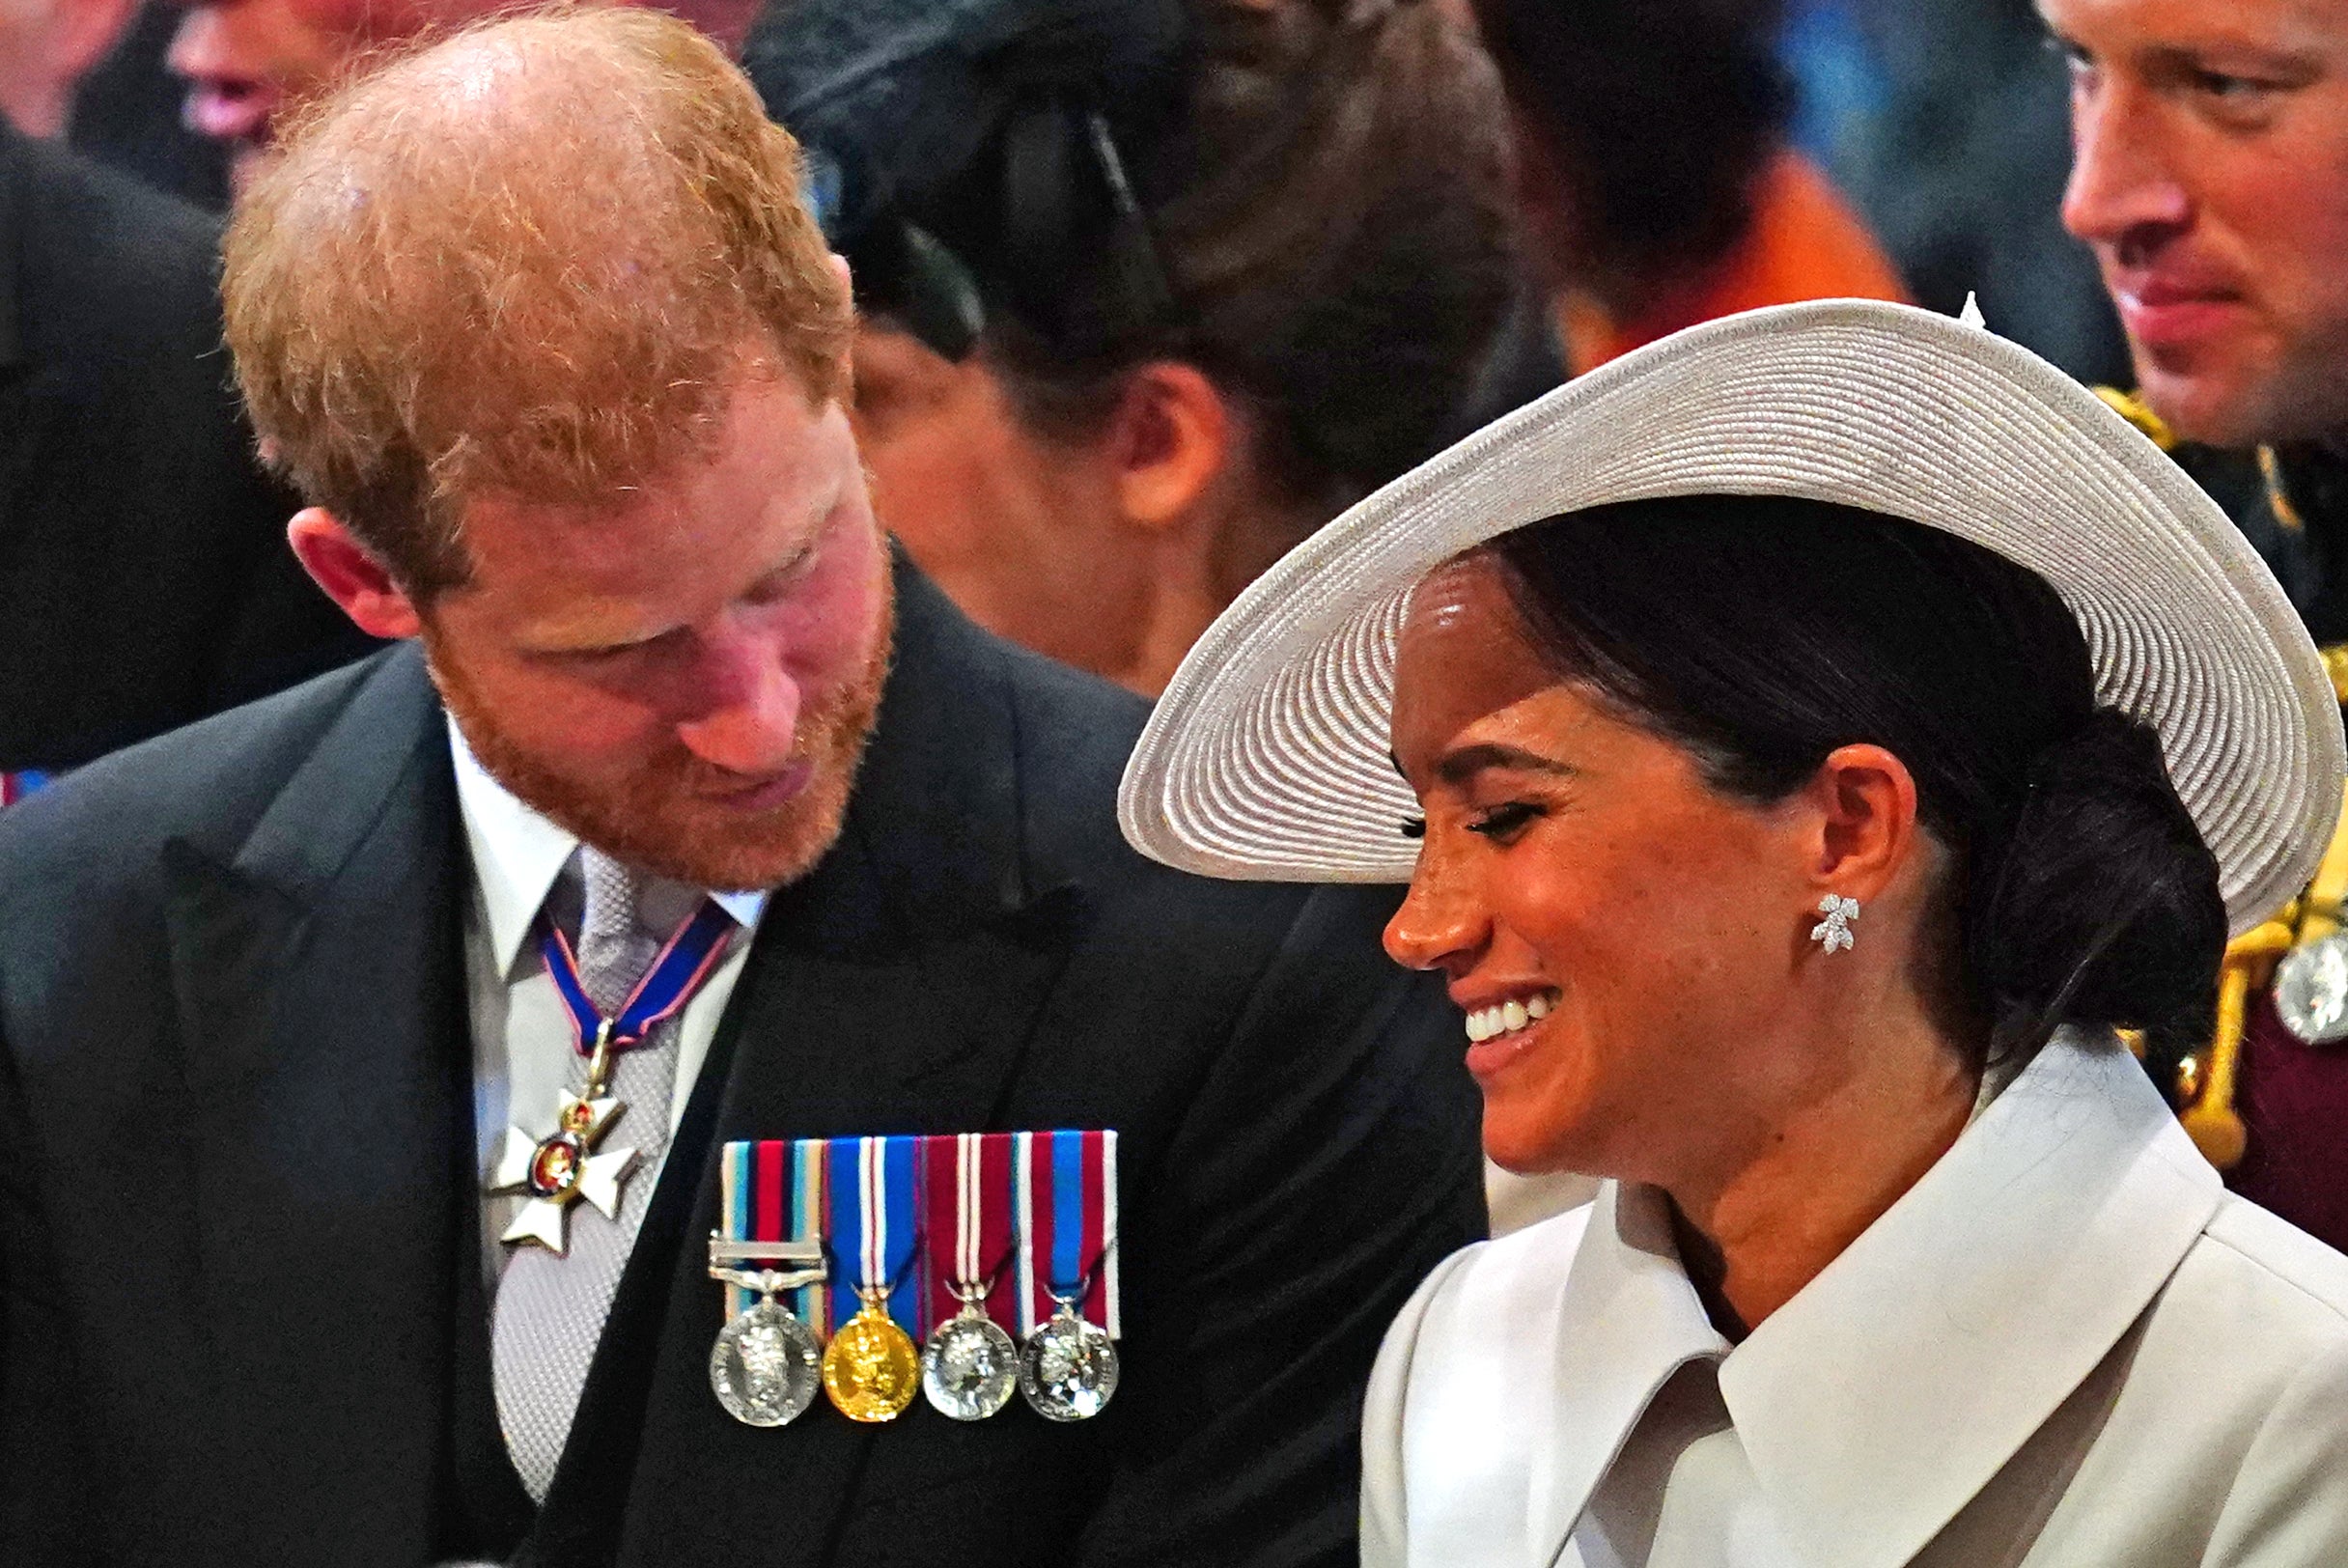 The Duke and Duchess of Sussex share a smile before the service began (Victoria Jones/PA)